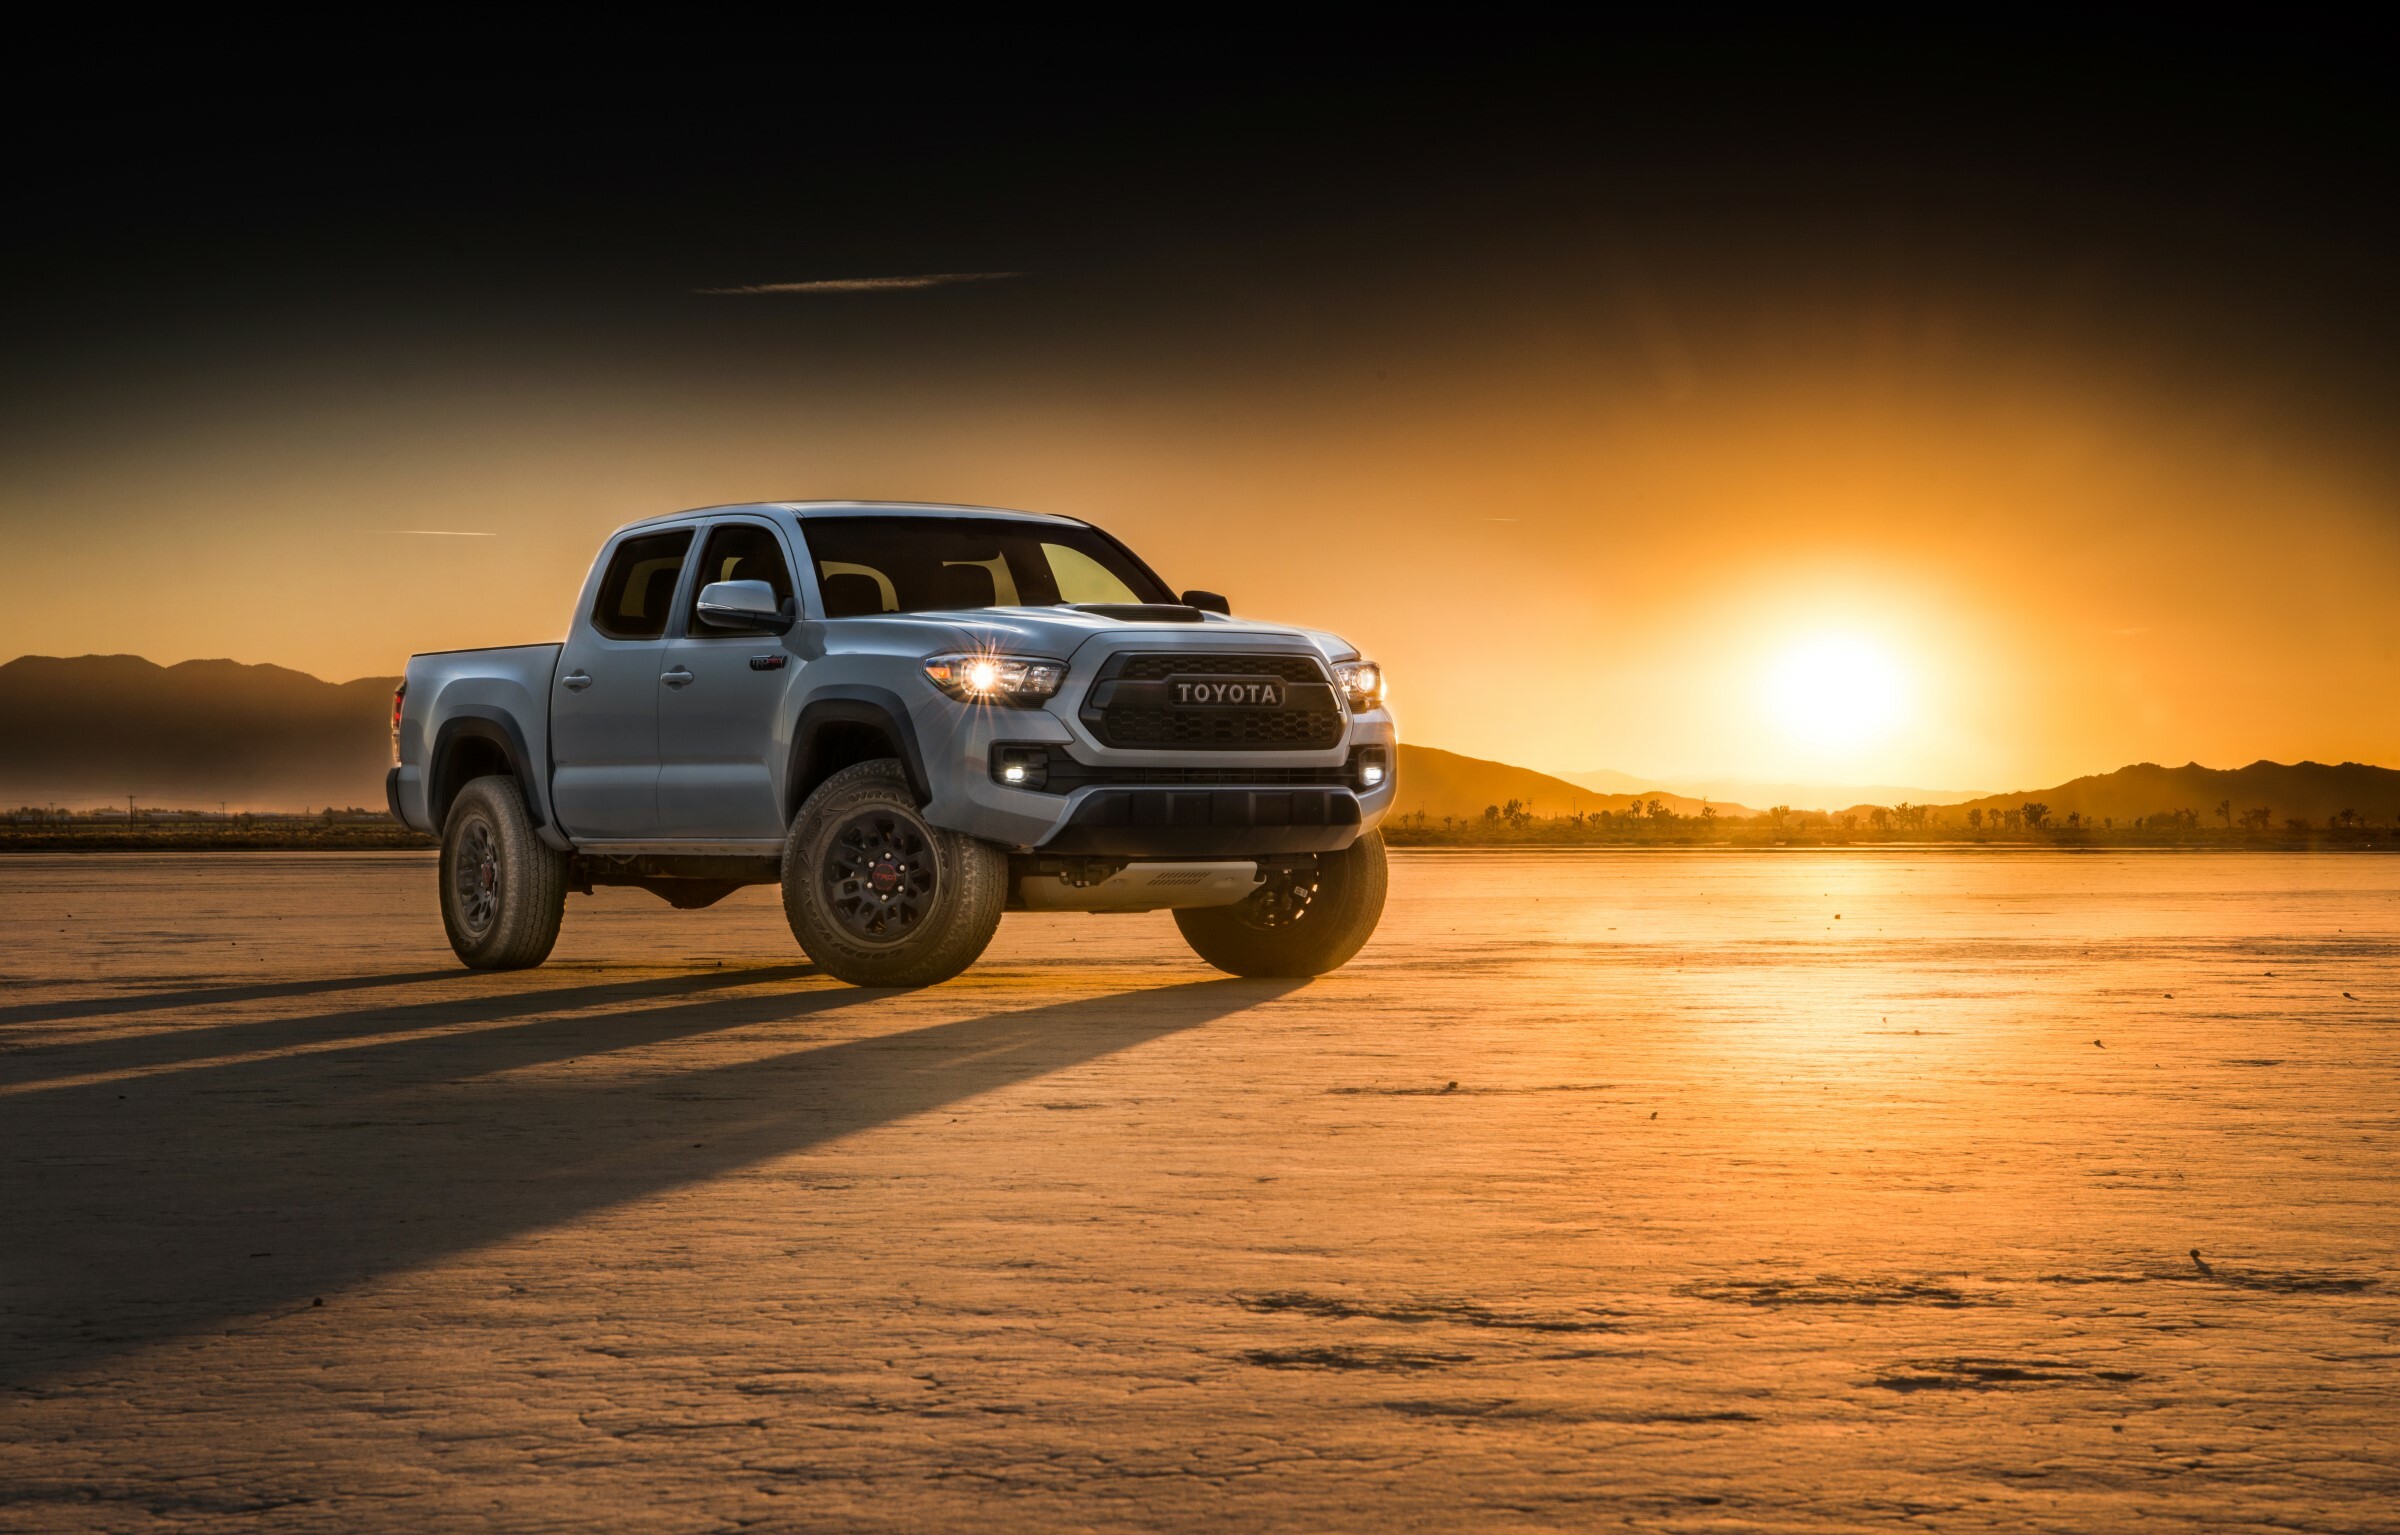 Toyota Tacoma: TRD Pro model, The X-Runner features the 1GR-FE paired to a six-speed manual transmission. 2400x1540 HD Wallpaper.